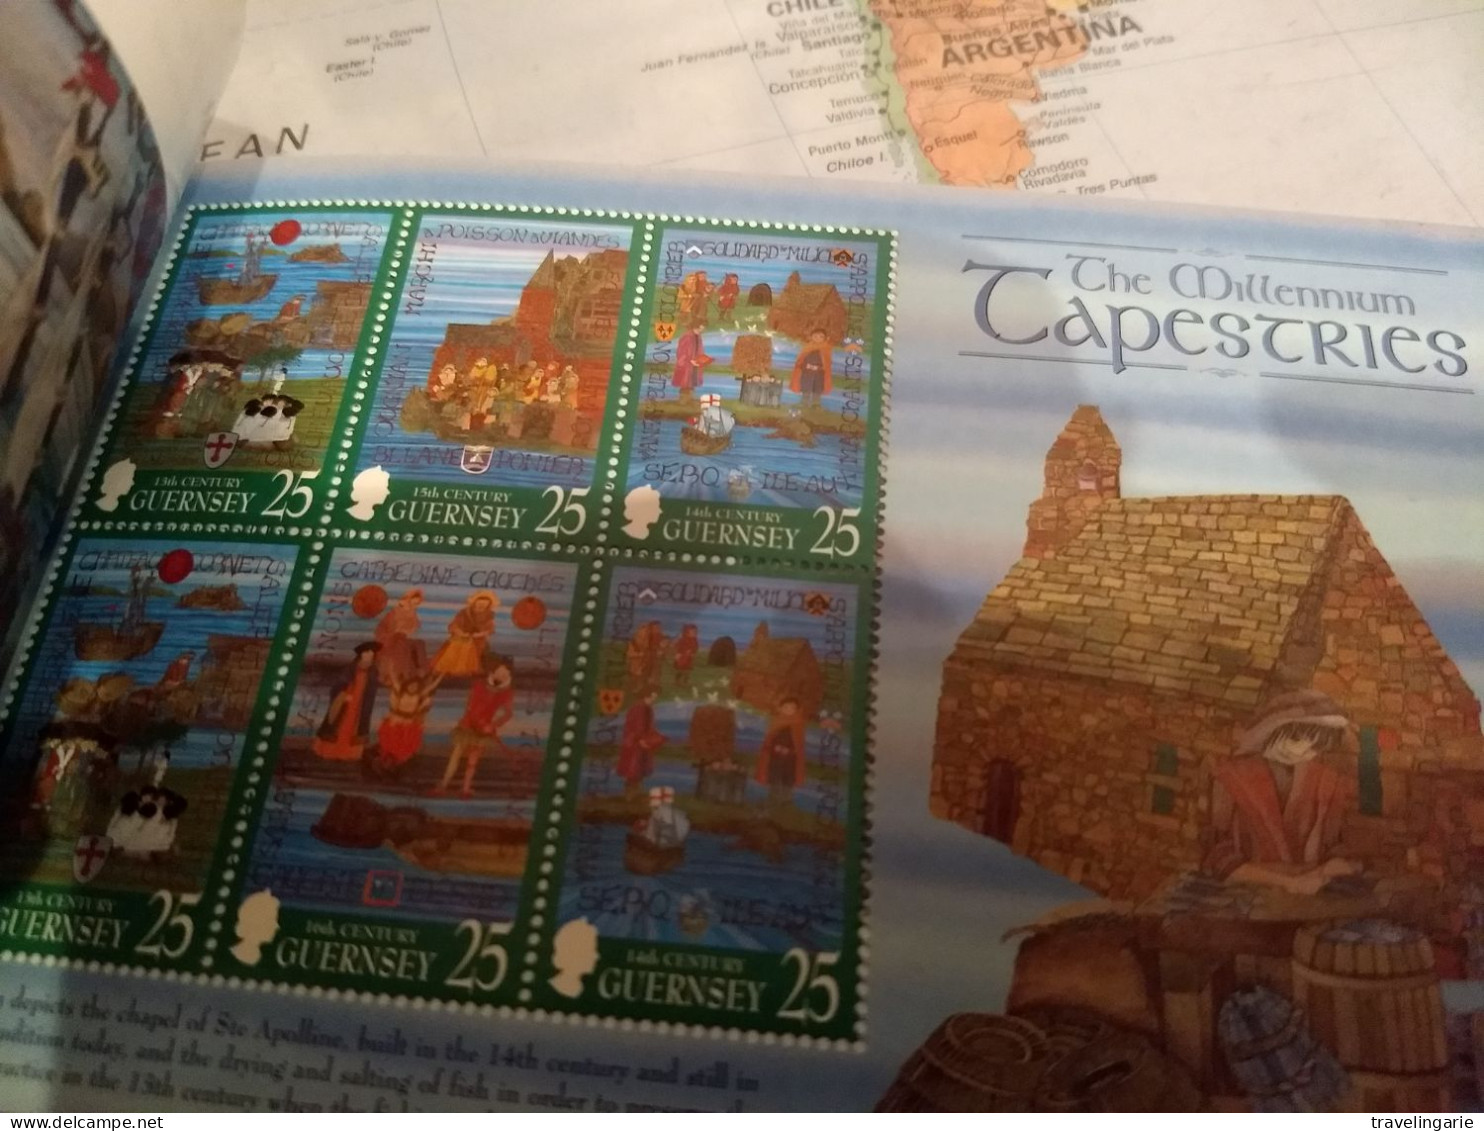 Guernsey 1998 Prestige Booklet Tapestries  Ship On Cover MNH ** - Marittimi